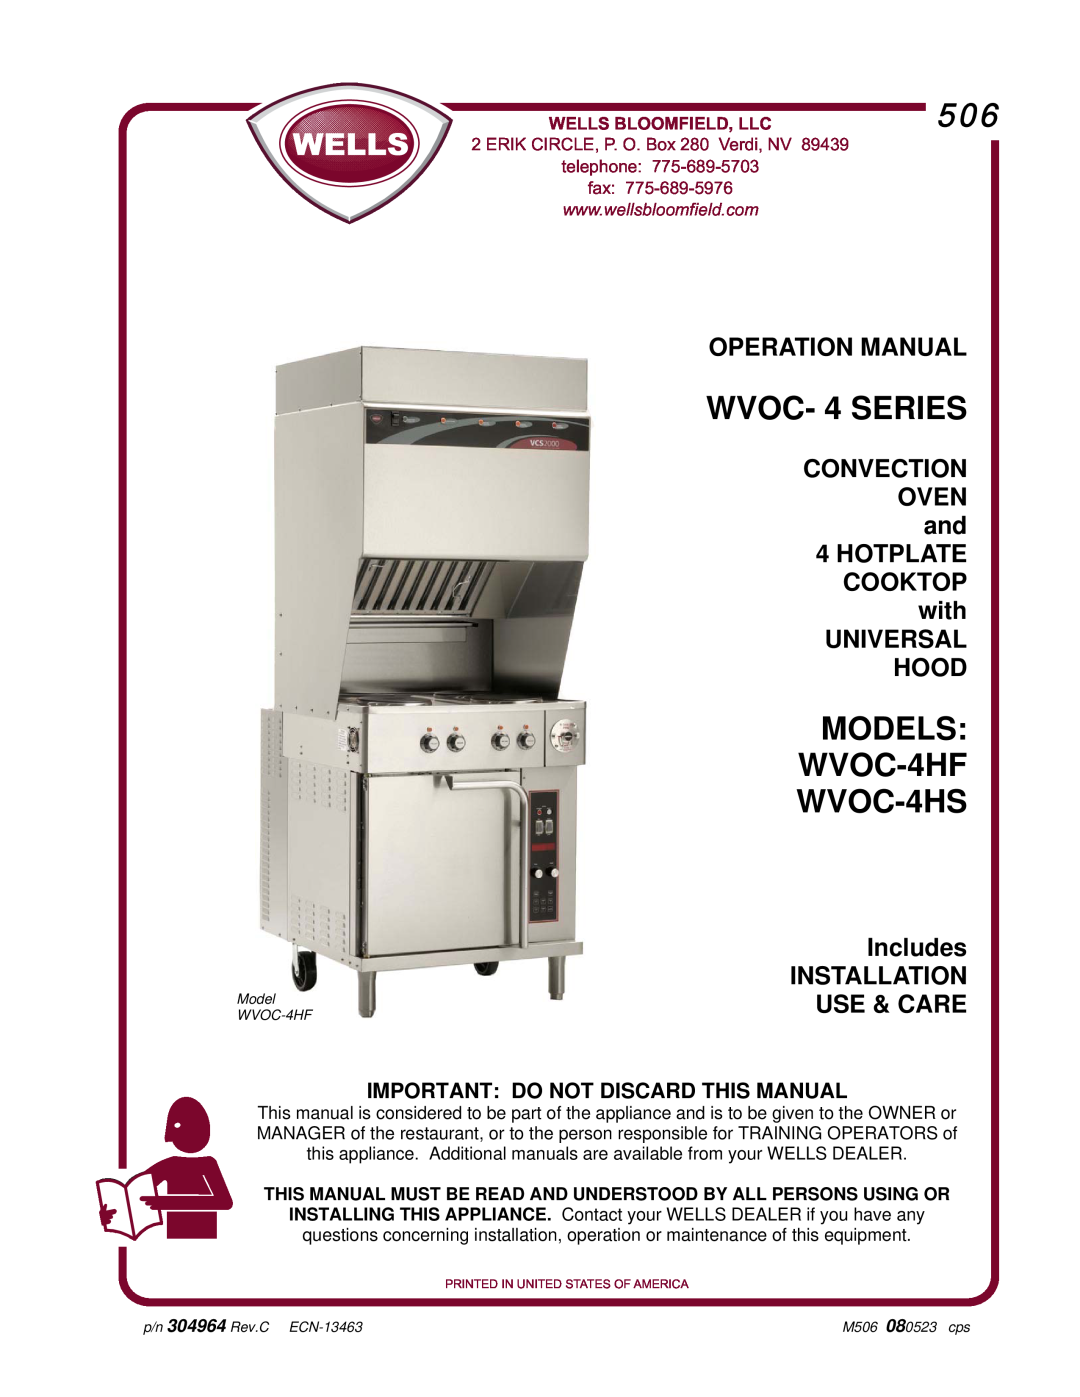 Wells WVOC-4HC operation manual Universal Hood, Includes INSTALLATION USE & CARE, Important Do Not Discard This Manual 